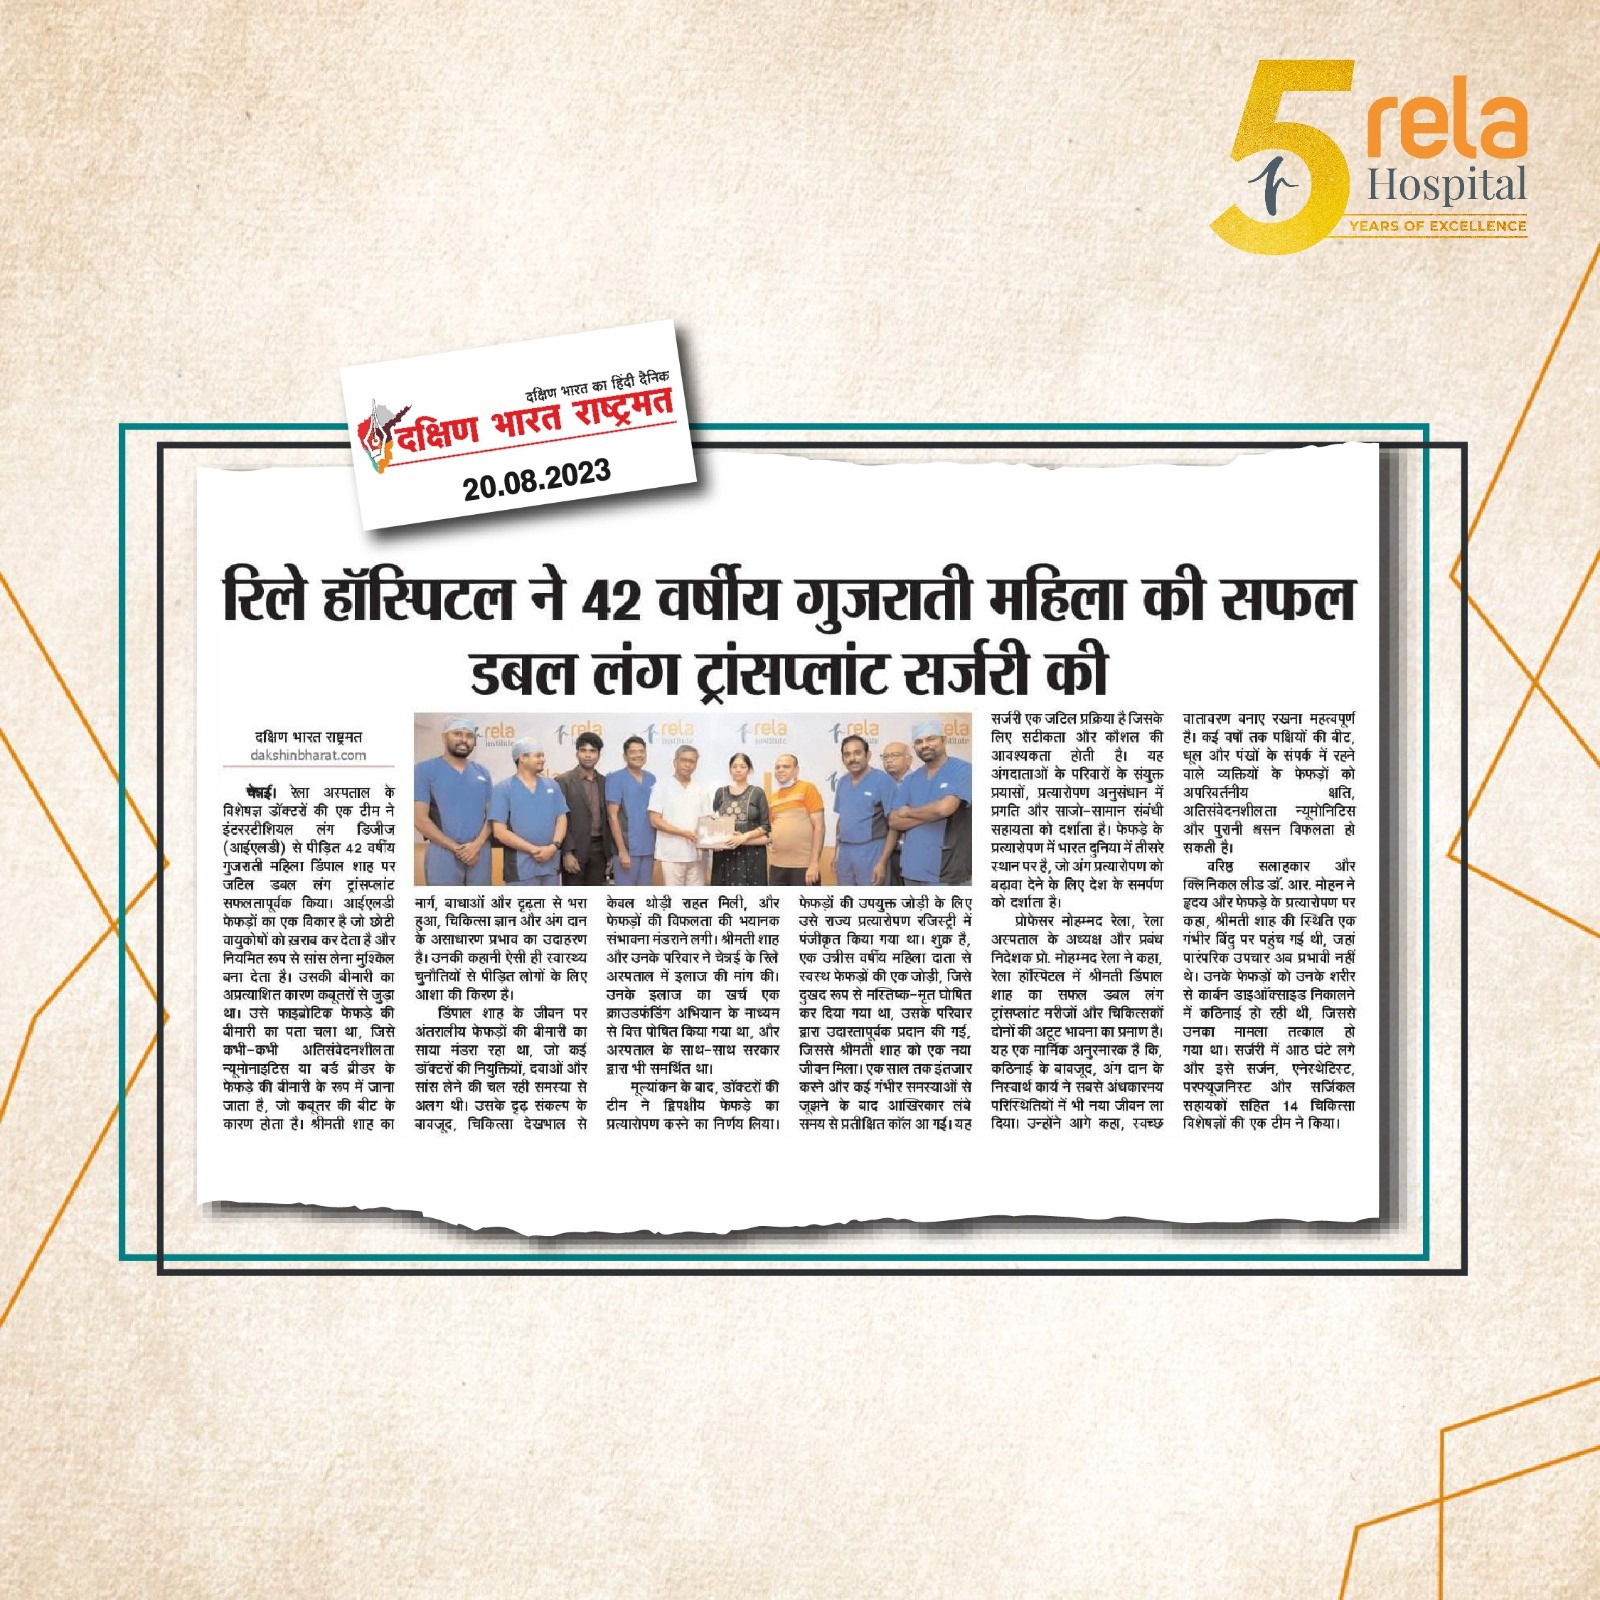 Rela Hospital Performs Successful Double Lung Transplant Surgery on a 42-year-old Gujarati Woman